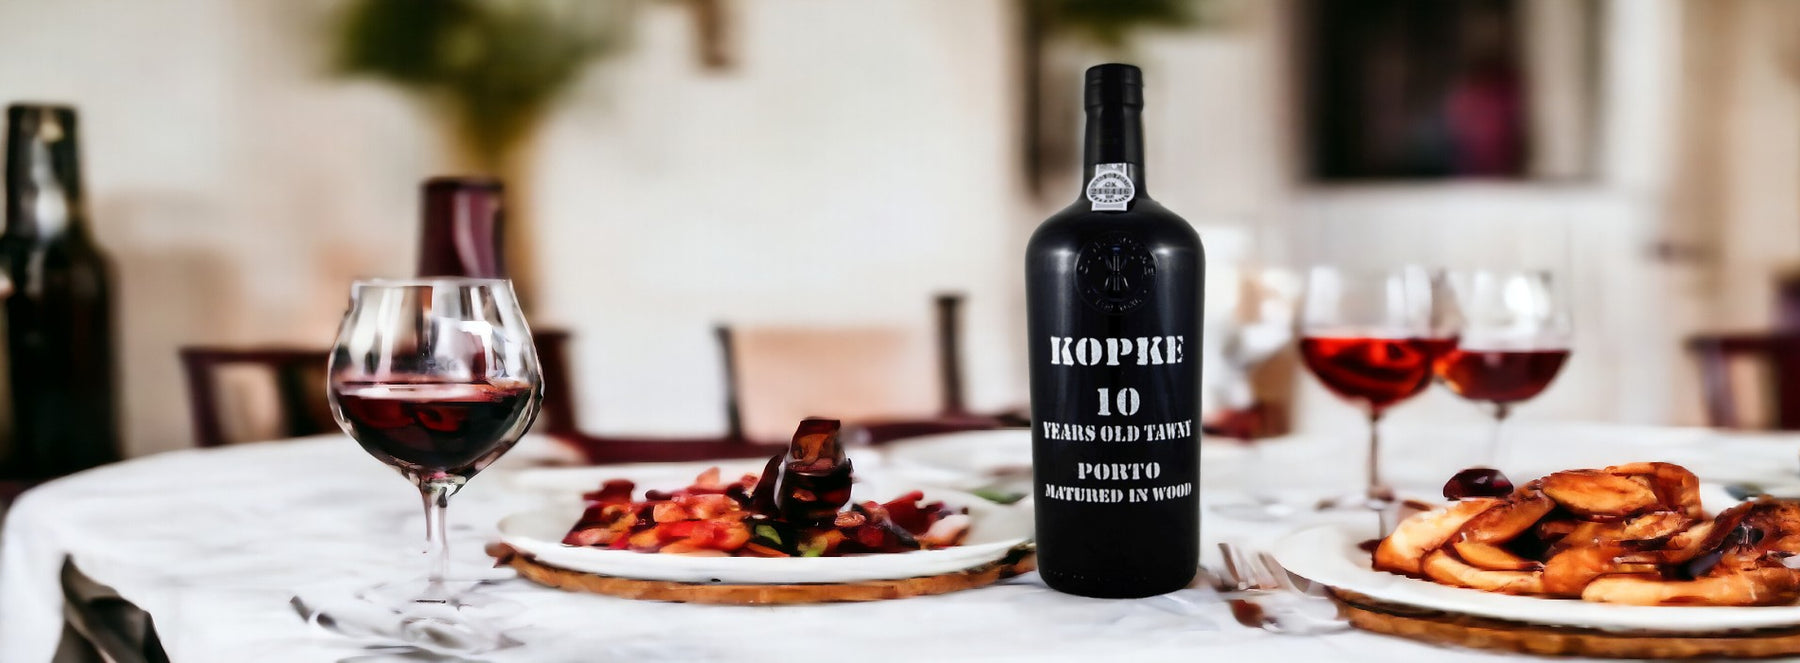 Crack Open The Port Wine At Easter